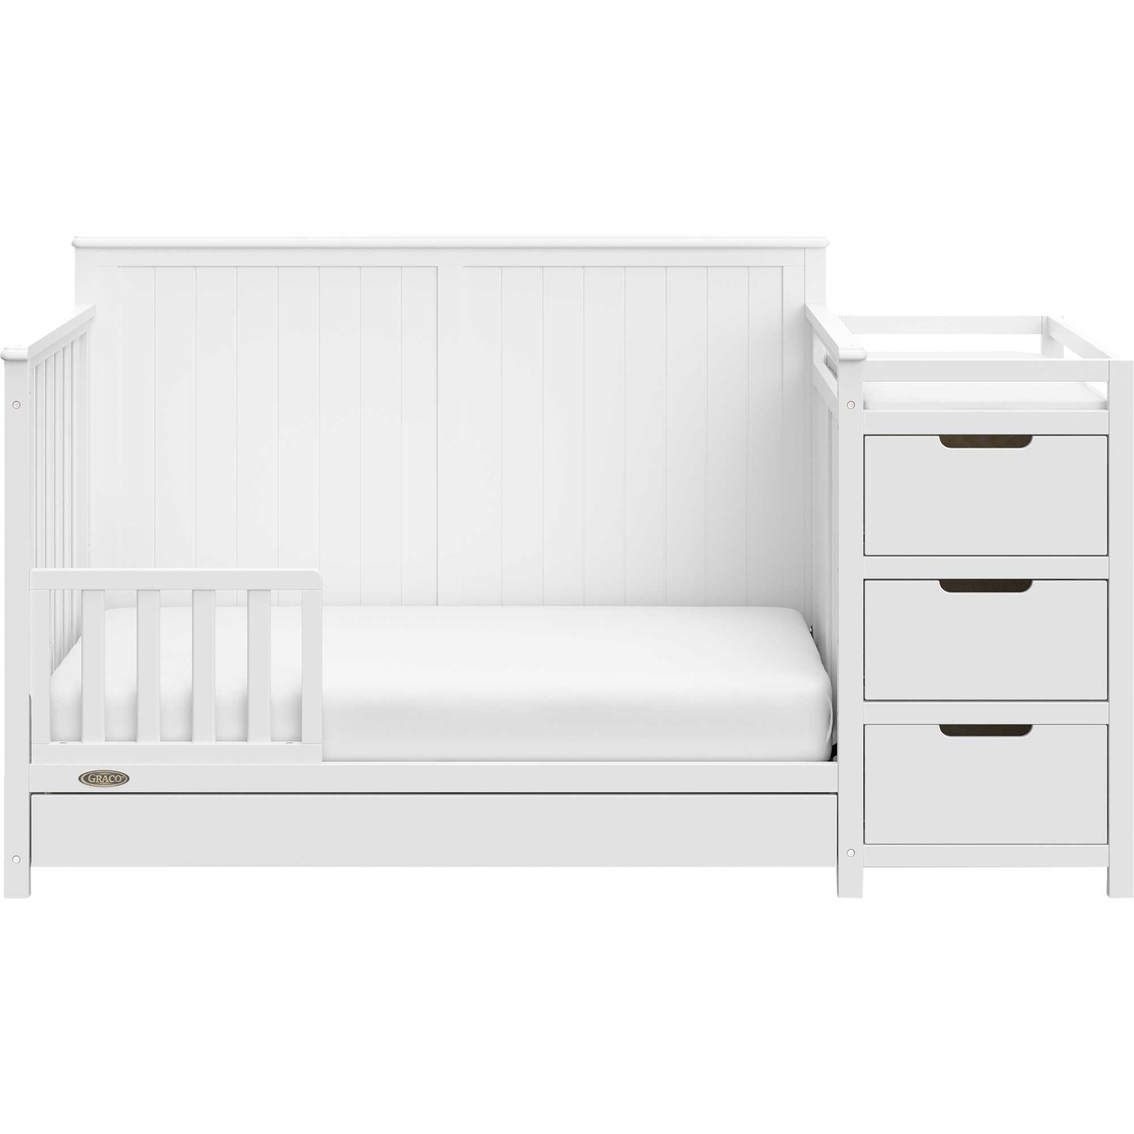 Graco Hadley Crib and Changer with Drawer - Image 4 of 10